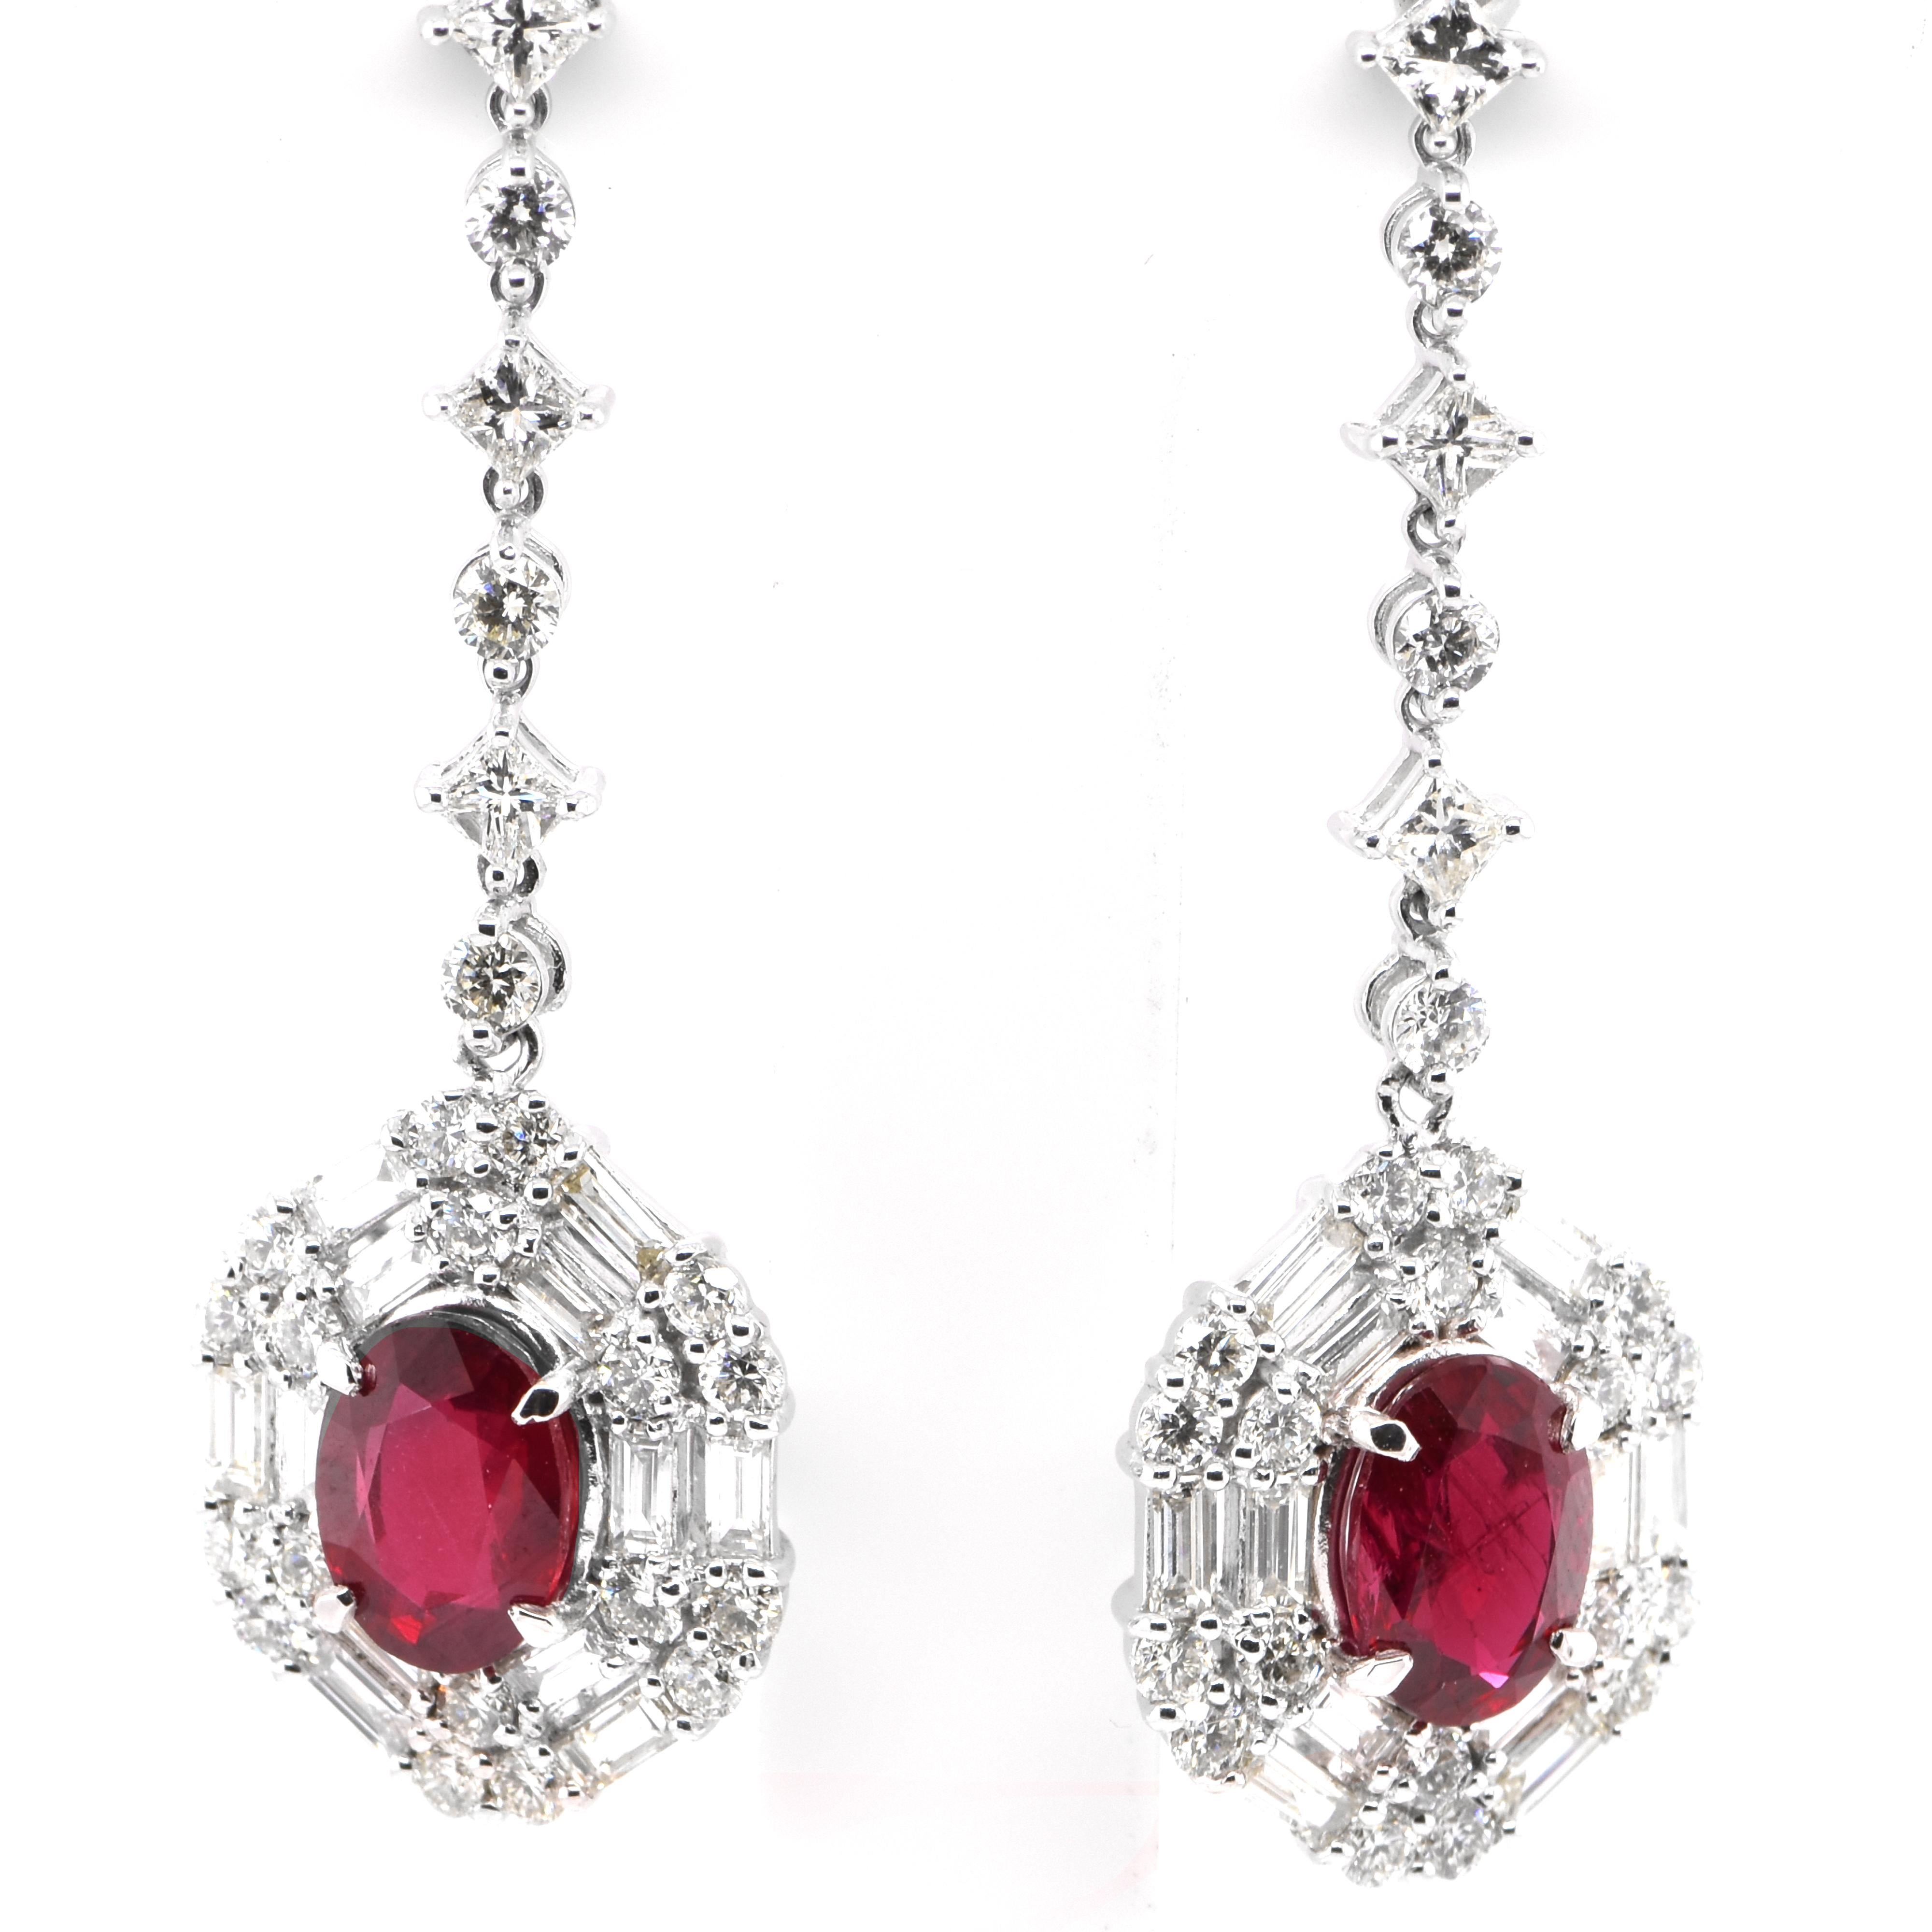 Oval Cut GIA Certified 2.19 Carat Natural Untreated Ruby Drop Earrings Set in Platinum